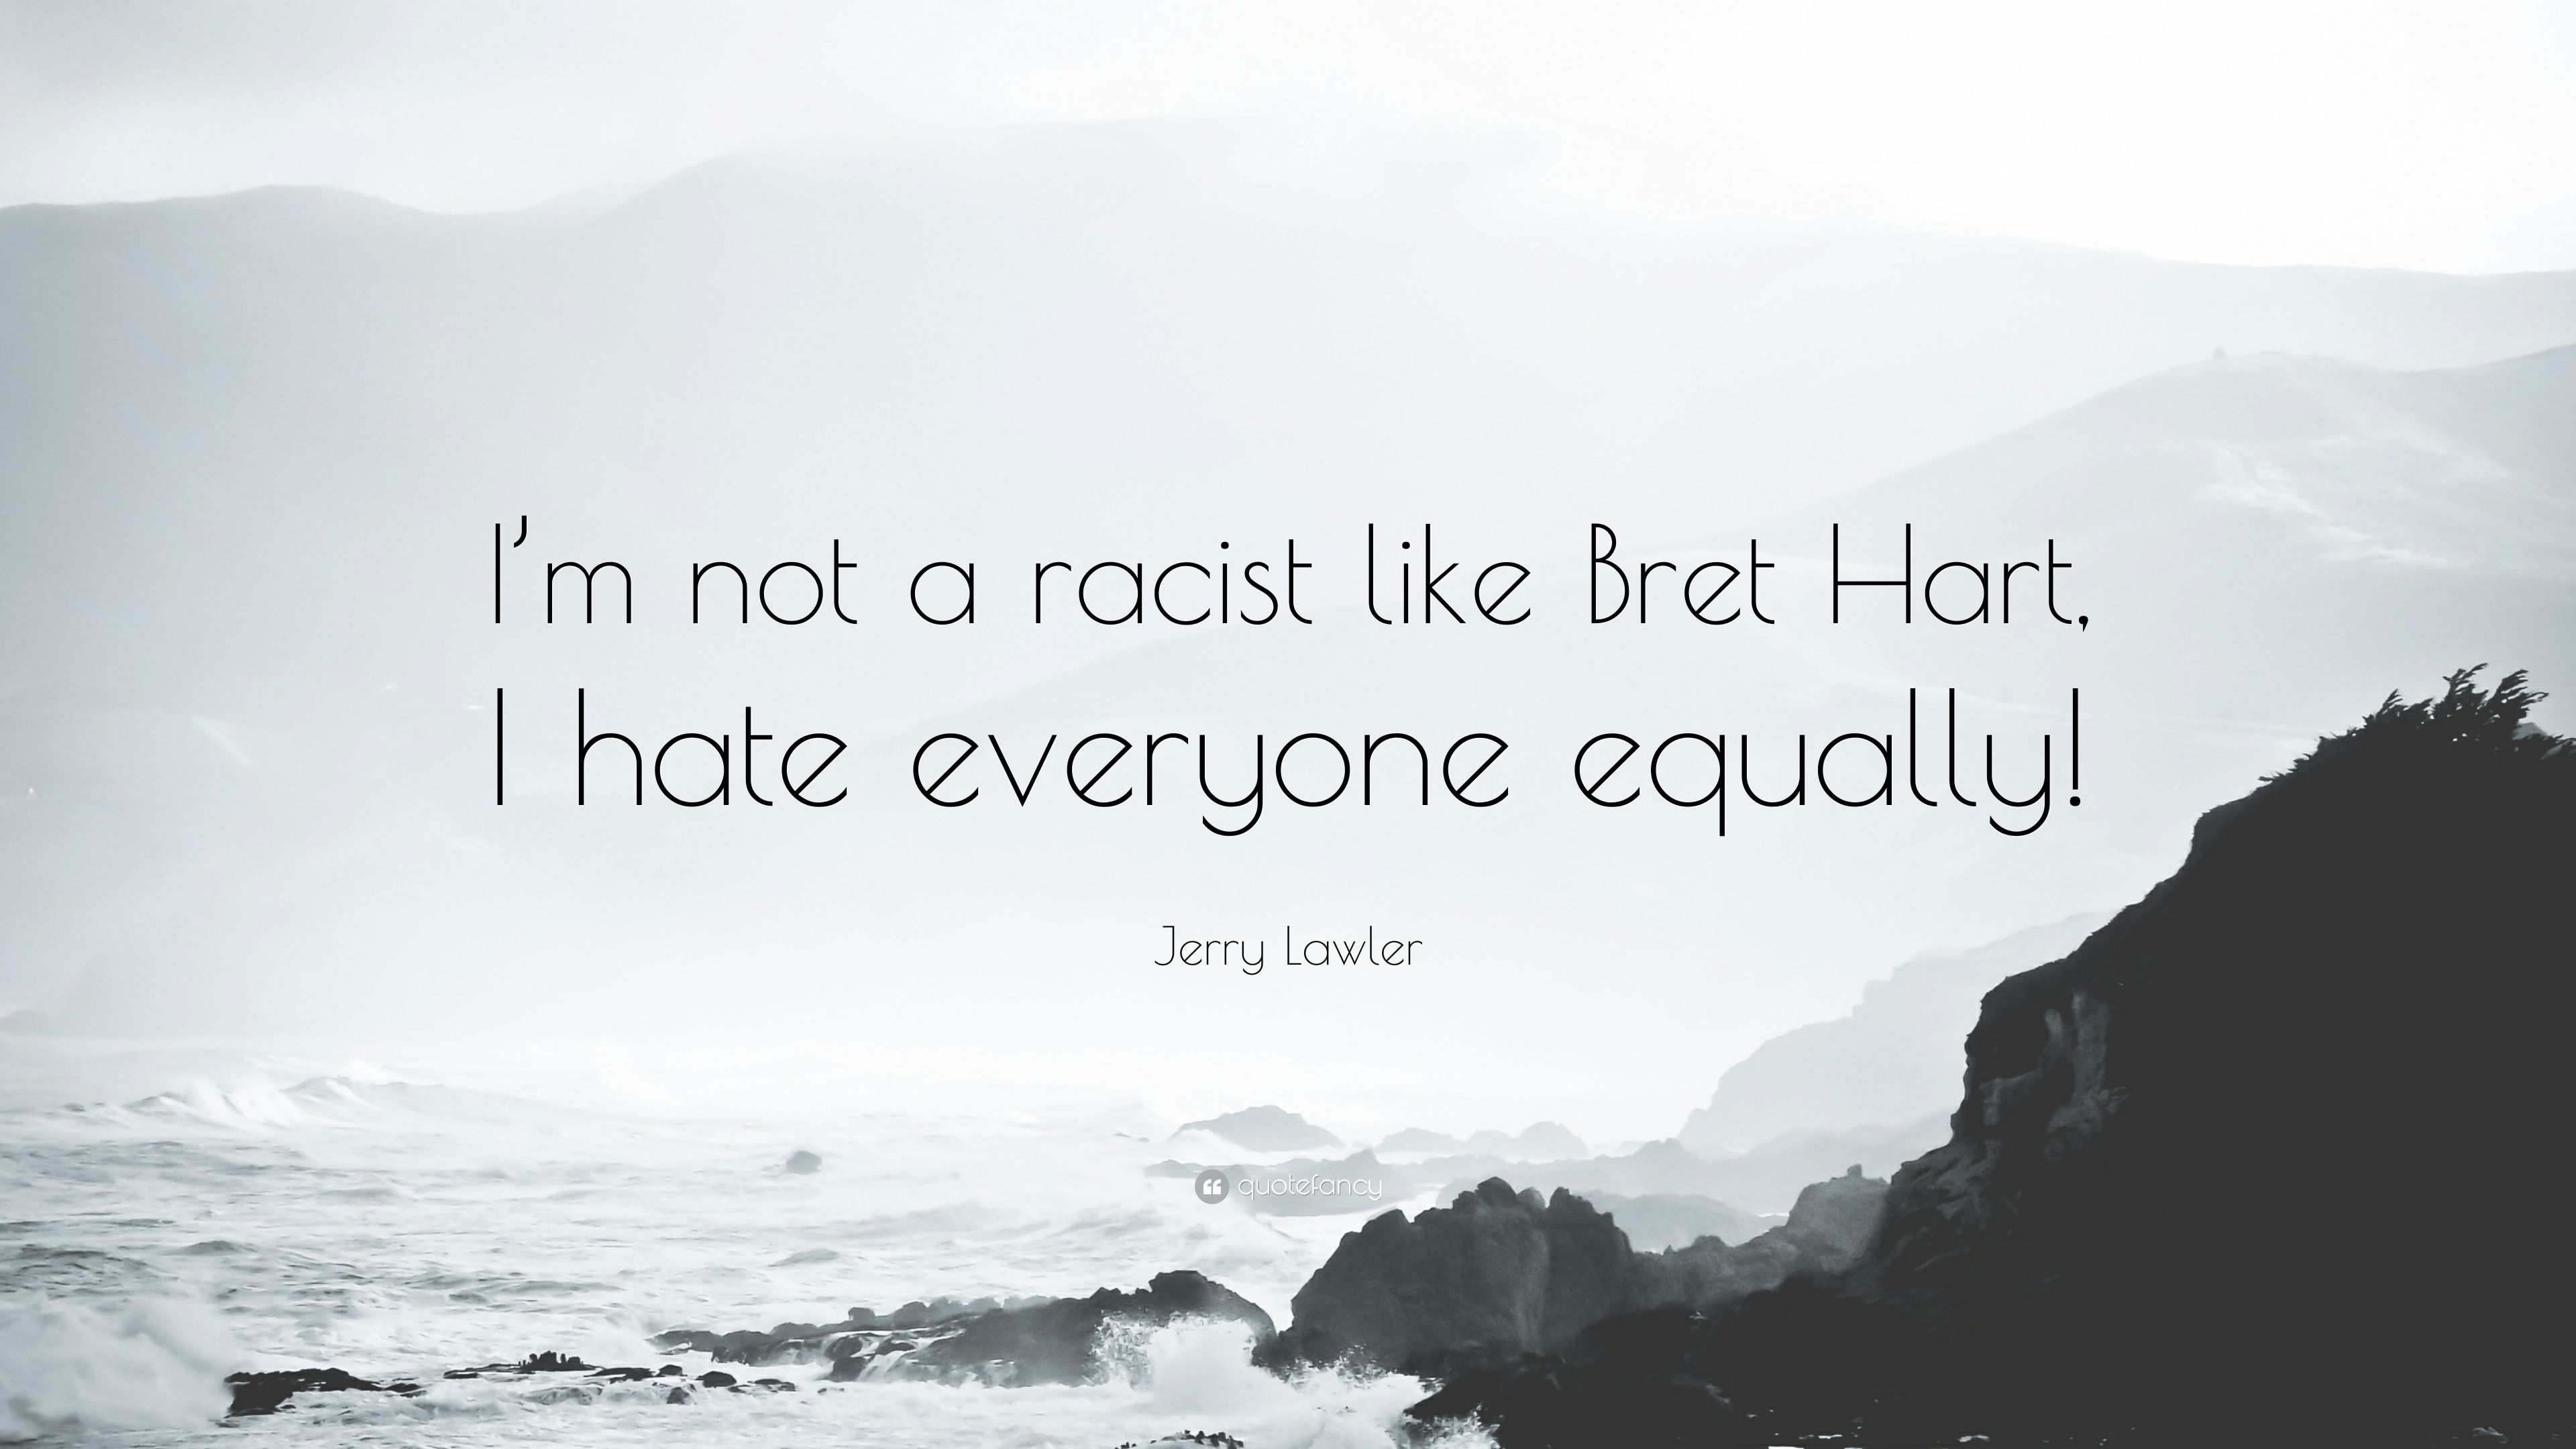 Jerry Lawler Quote: “I'm not a racist like Bret Hart, I hate everyone equally!” (7 wallpaper)